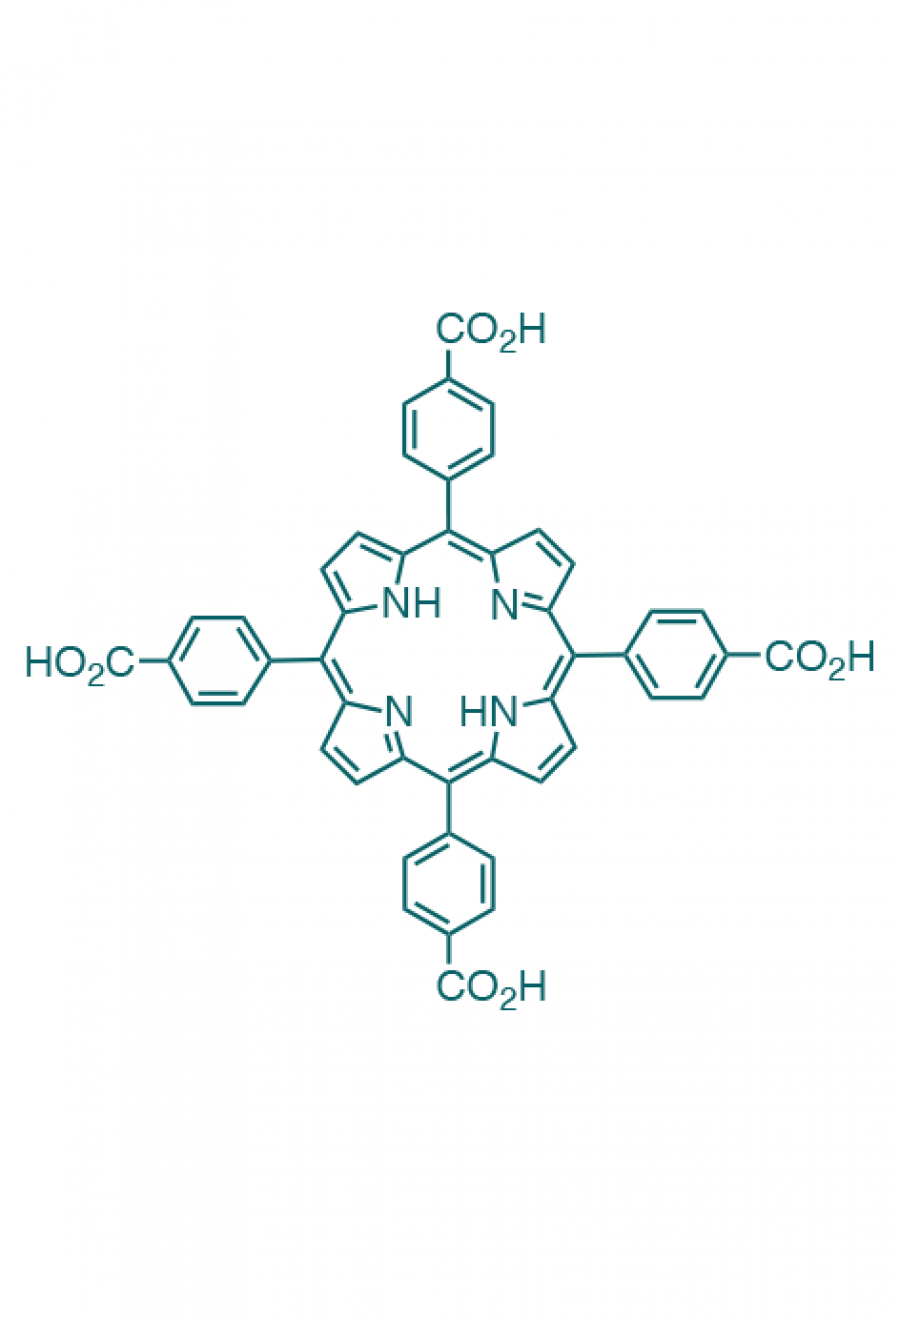 5,10,15,20-(tetra-4-carboxyphenyl)porphyrin  | Porphychem Expert porphyrin synthesis for research & industry